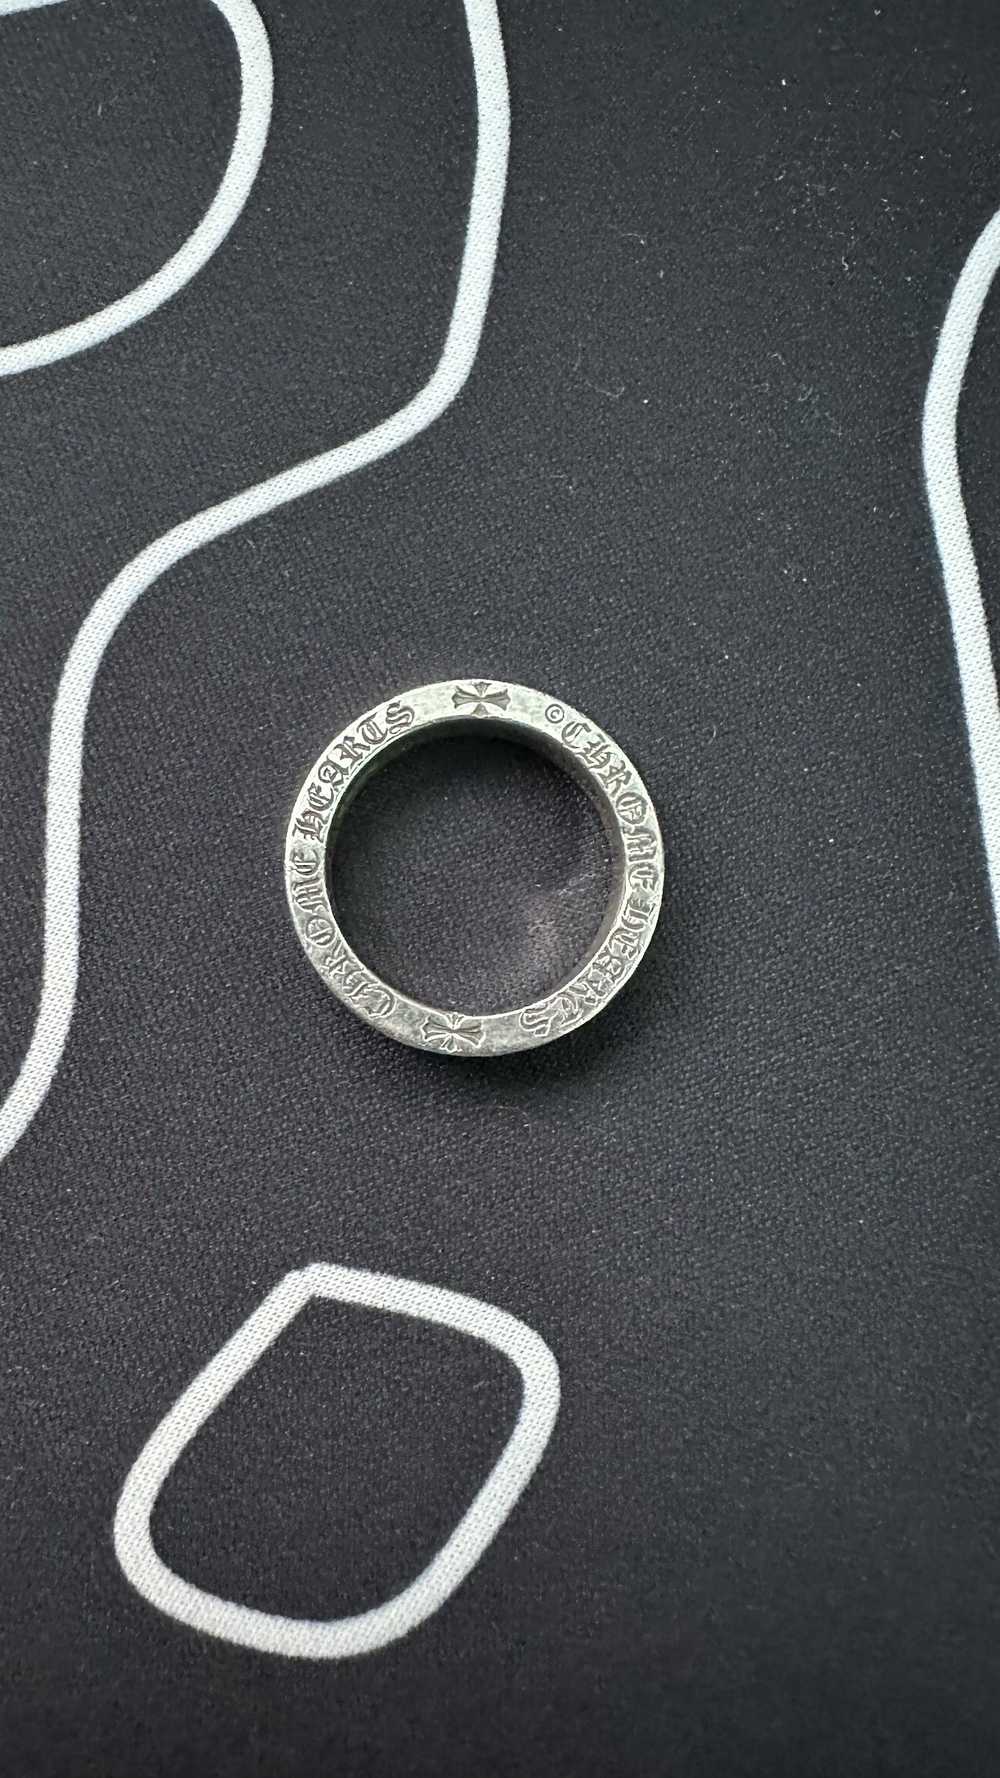 Chrome Hearts 6mm FU spacer - image 4